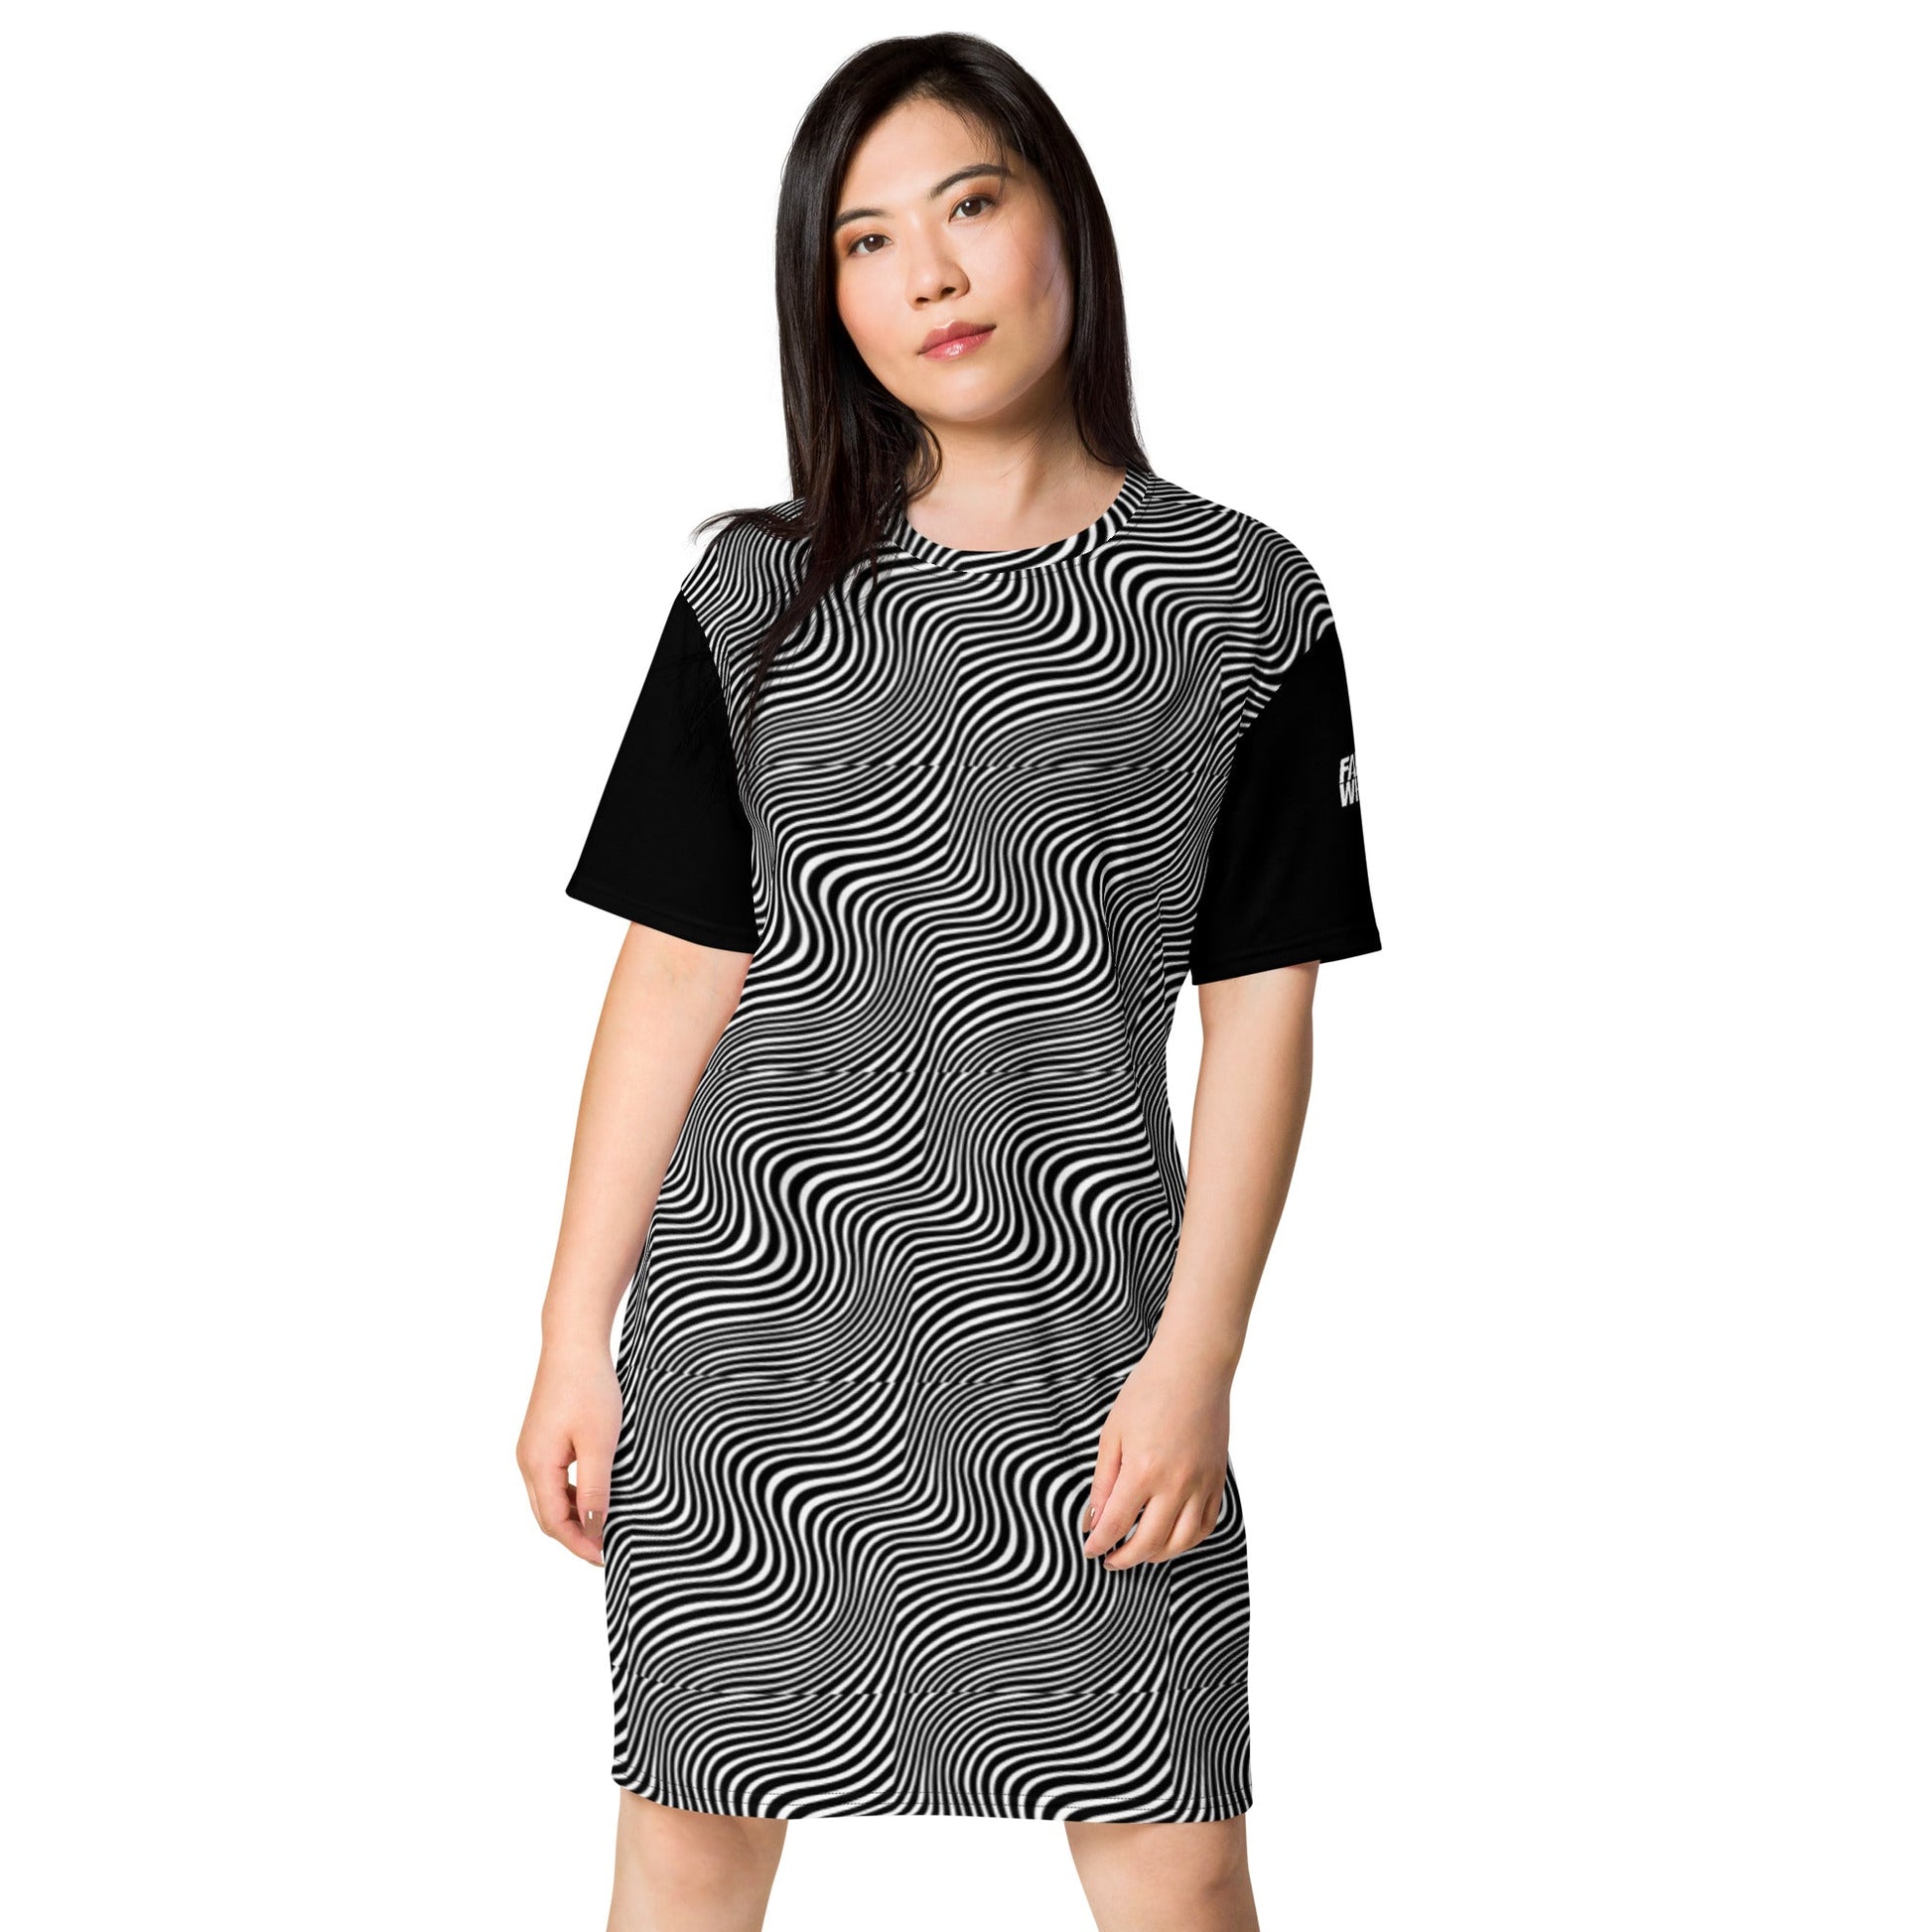 Farris Wheel Limited T-Shirt Dress - BeExtra! Apparel & More